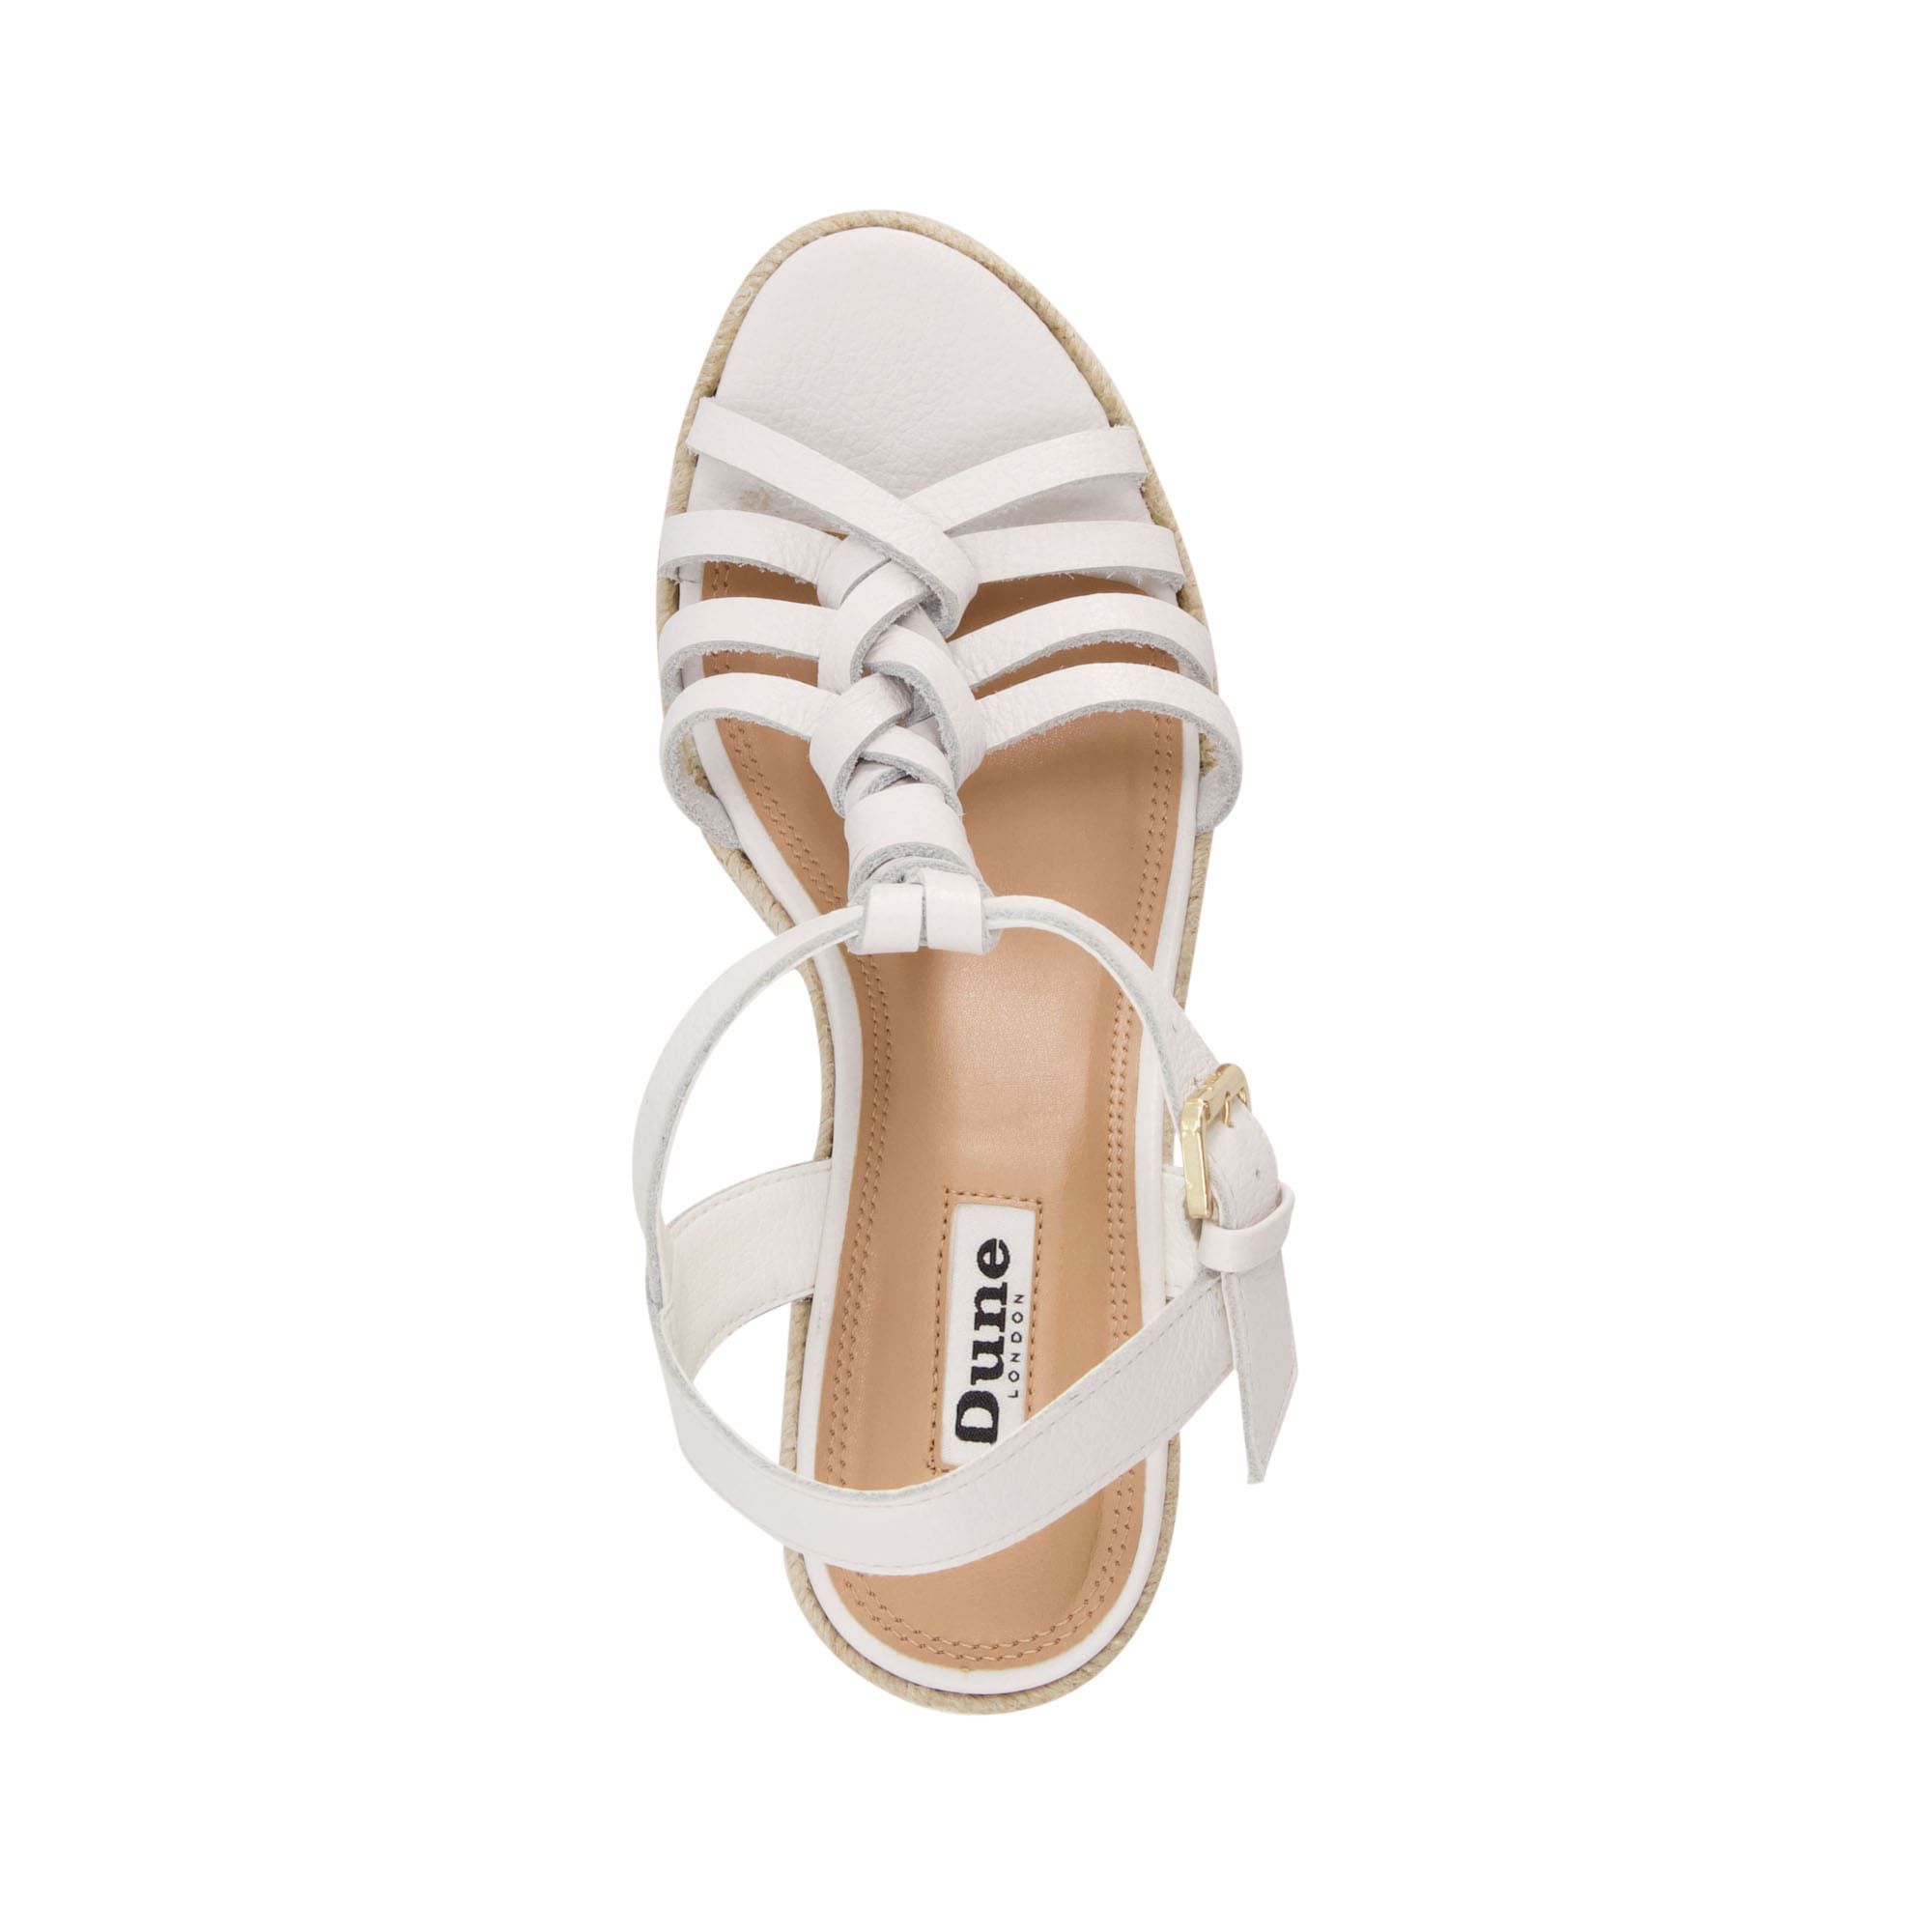 Reinvigorate your Summer wardrobe. The plaited leather twists on these sandals enhance the luxe artisan feel. They rest on natural raffia high wedges, grounded with rubber for grip.